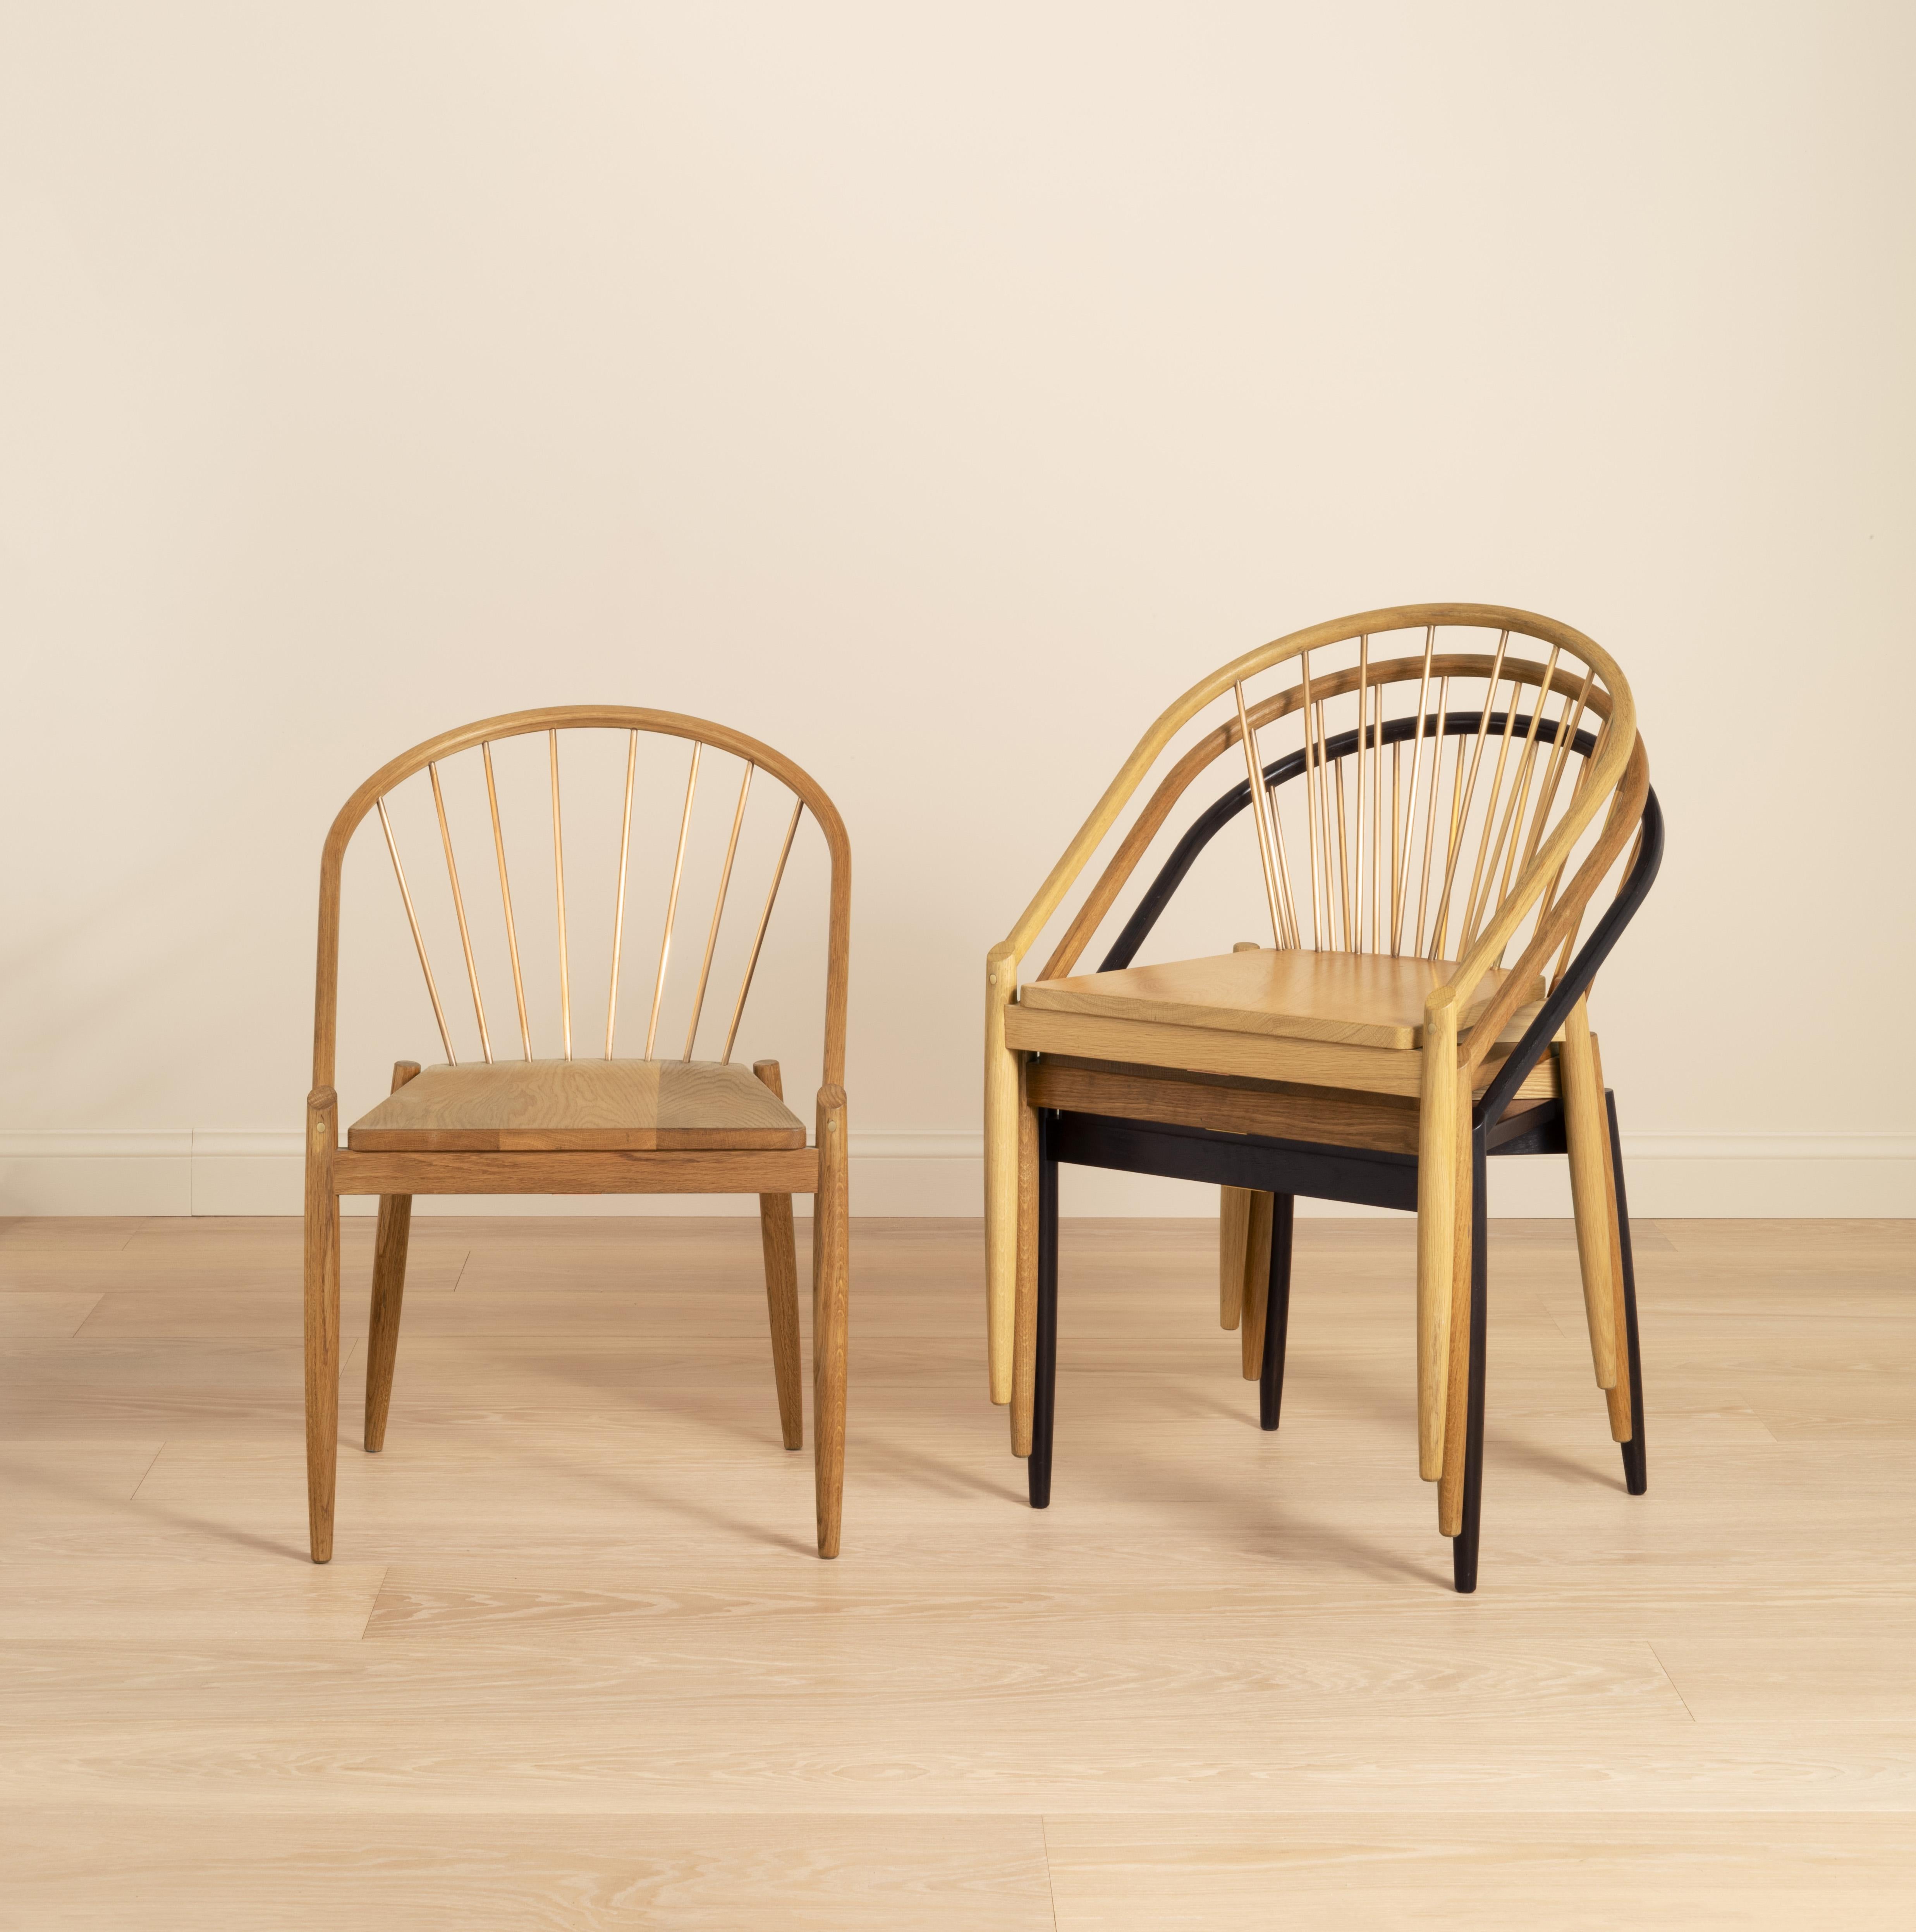 An elegant stacking chair inspired by classic Danish design, each chair is handcrafted in our Shropshire workshop, made in solid oak with solid brass rods and available in four different finishes: Light, Mid, Dark and Ebonised.
​
Available to view